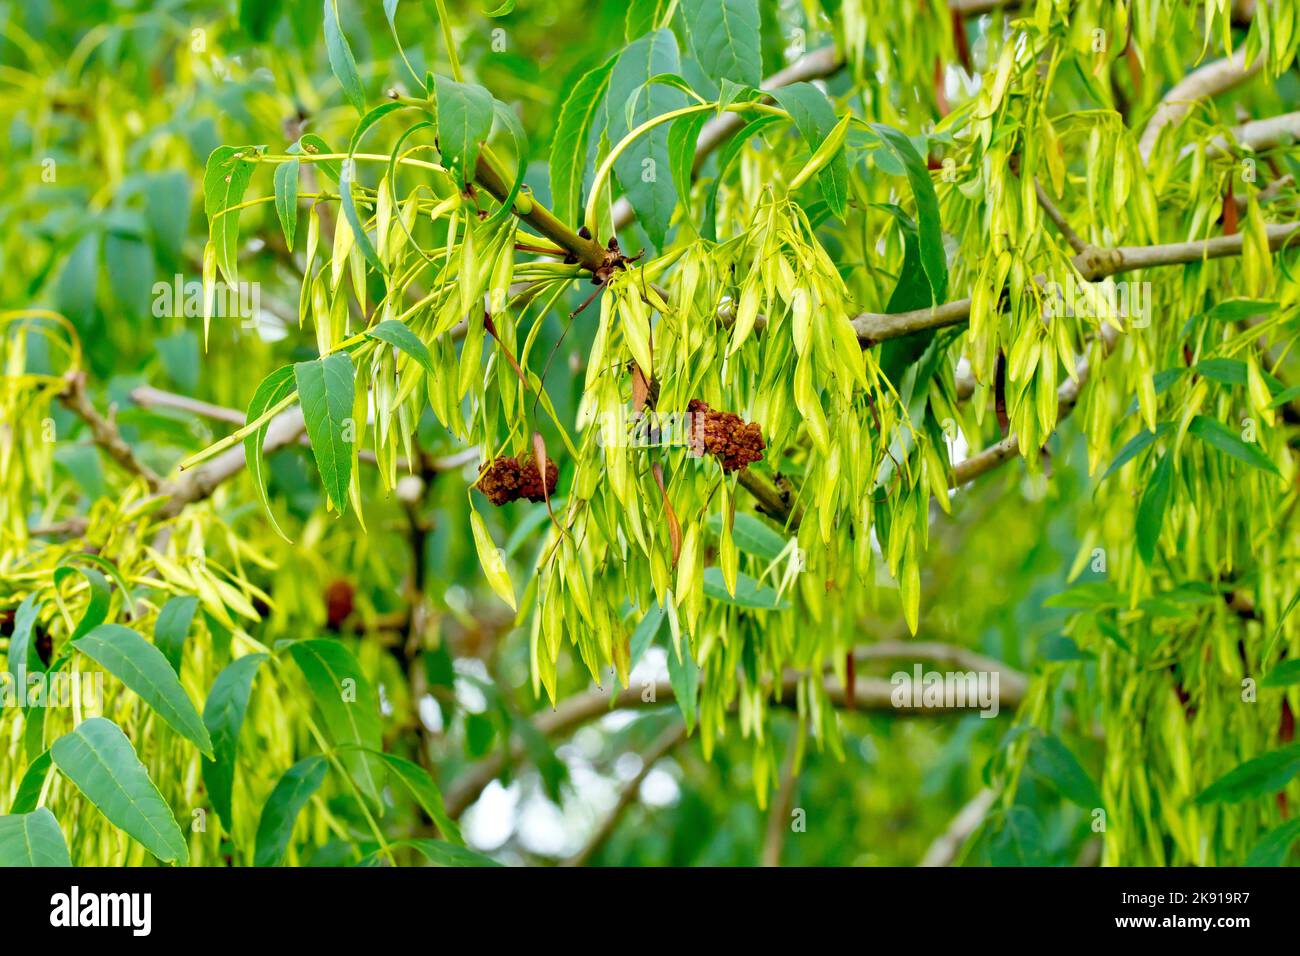 Ash (fraxinus excelsior), close up showing the tree in fruit with a mass of unripe green keys which will eventually go brown in the autumn. Stock Photo